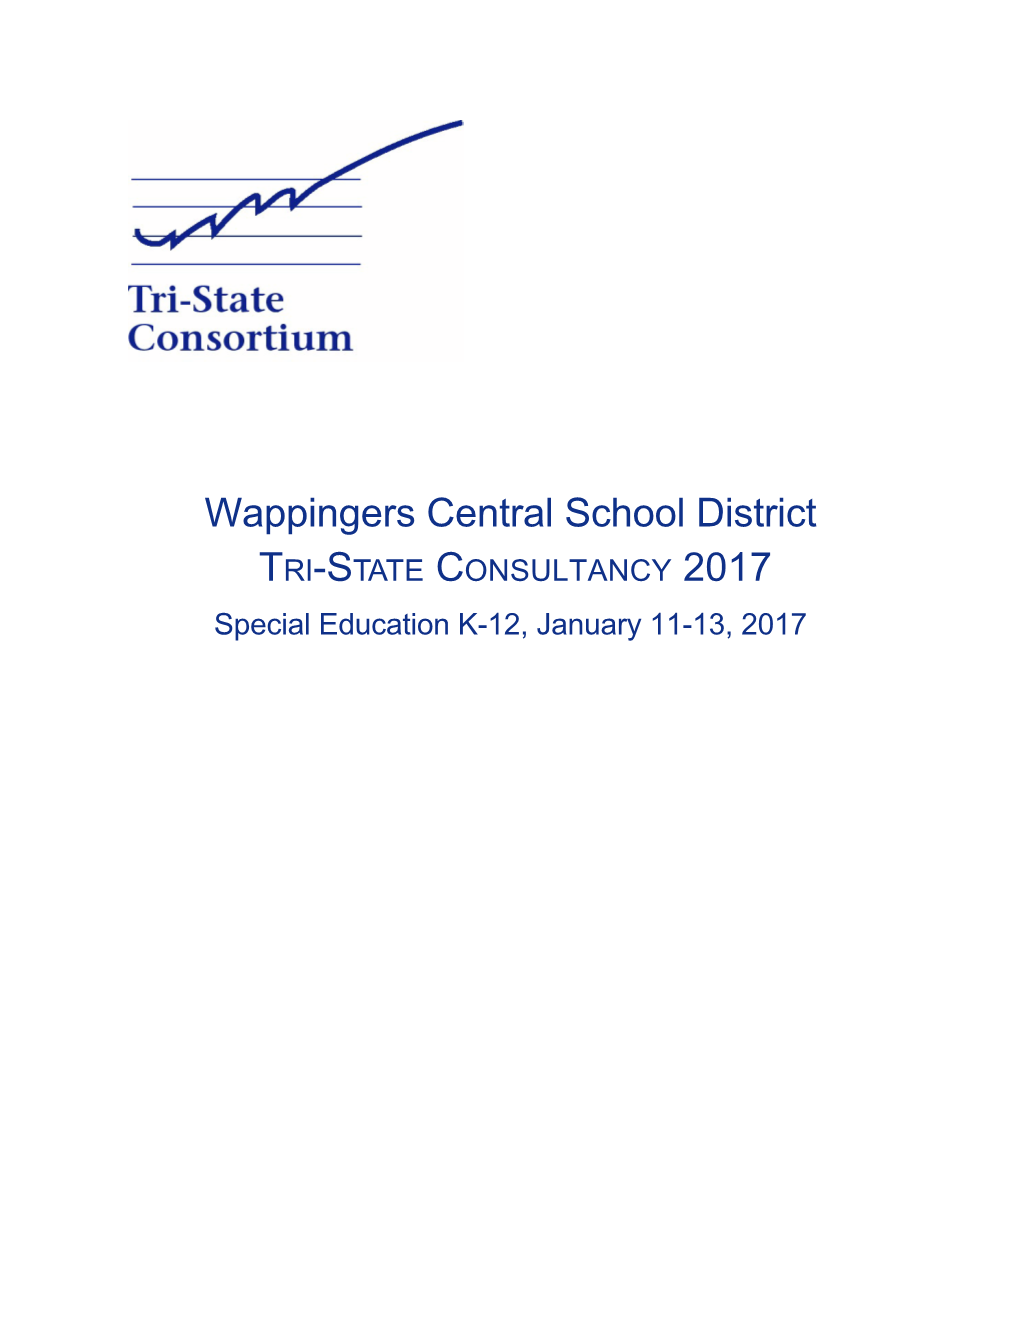 Wappingers Central School District TRI-STATE CONSULTANCY 2017 Special Education K-12, January 11-13, 2017